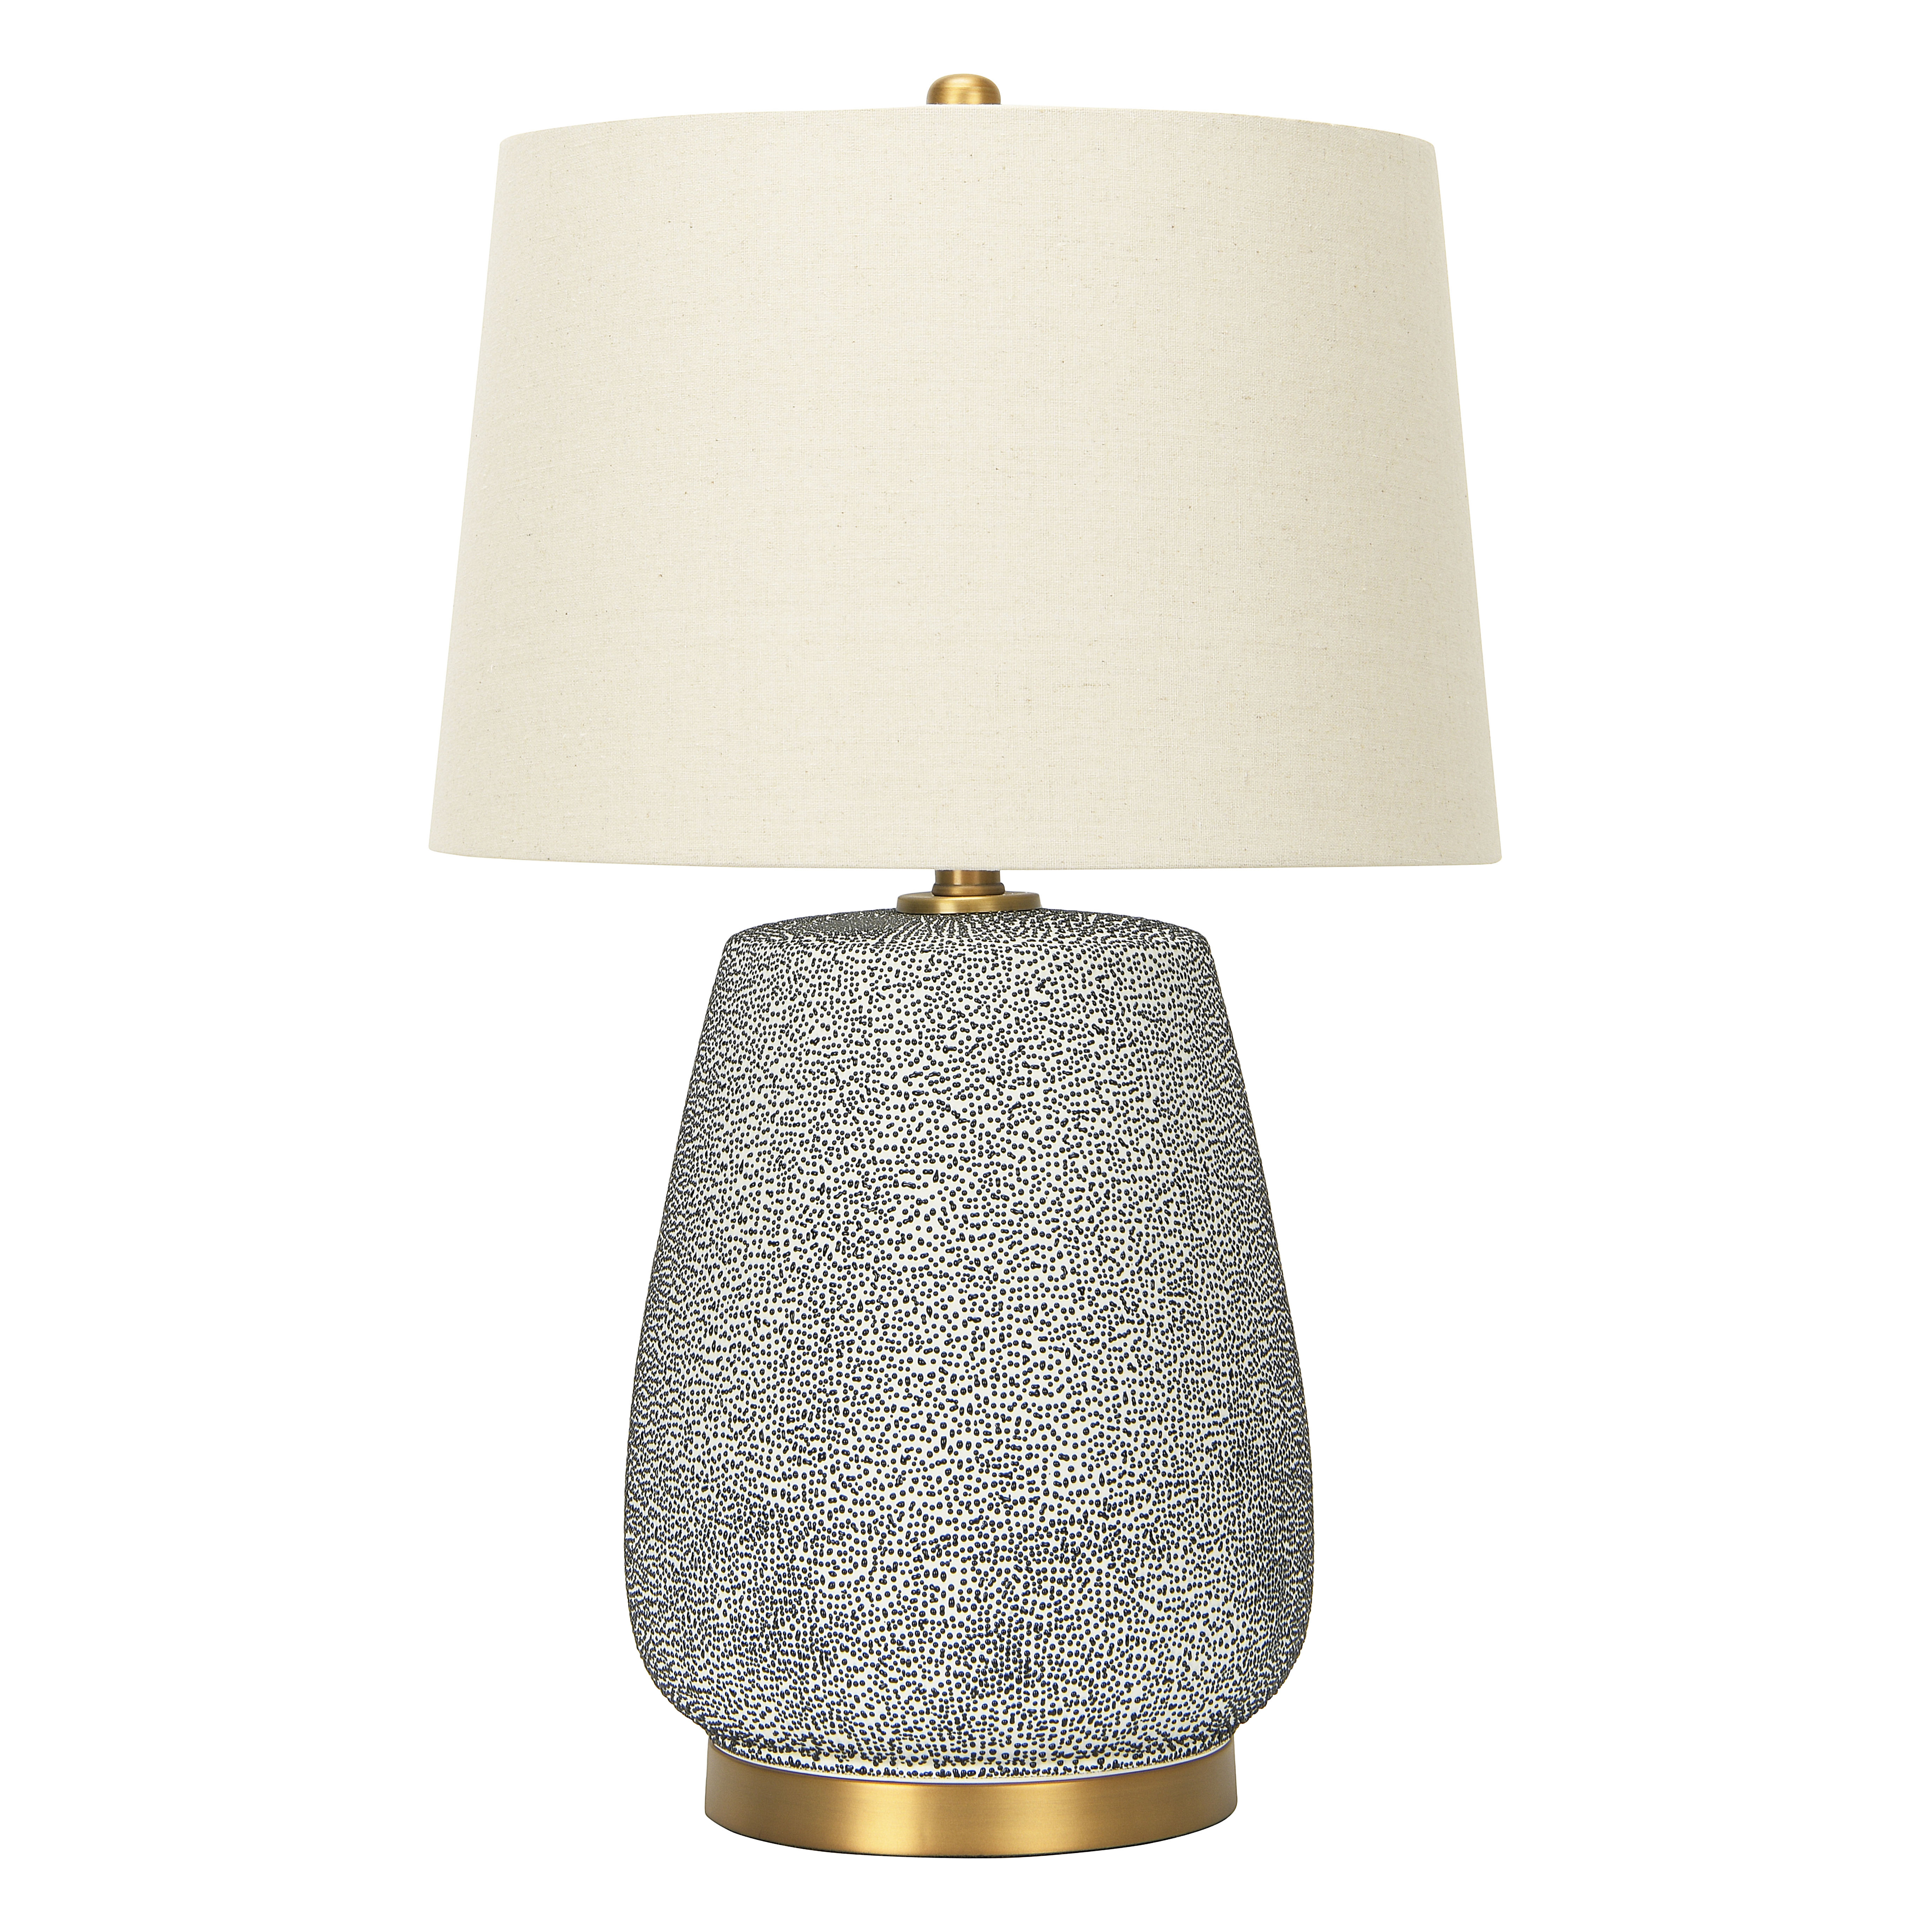 Textured Blue Glaze Ceramic Table Lamp with Natural Linen Shade - Nomad Home